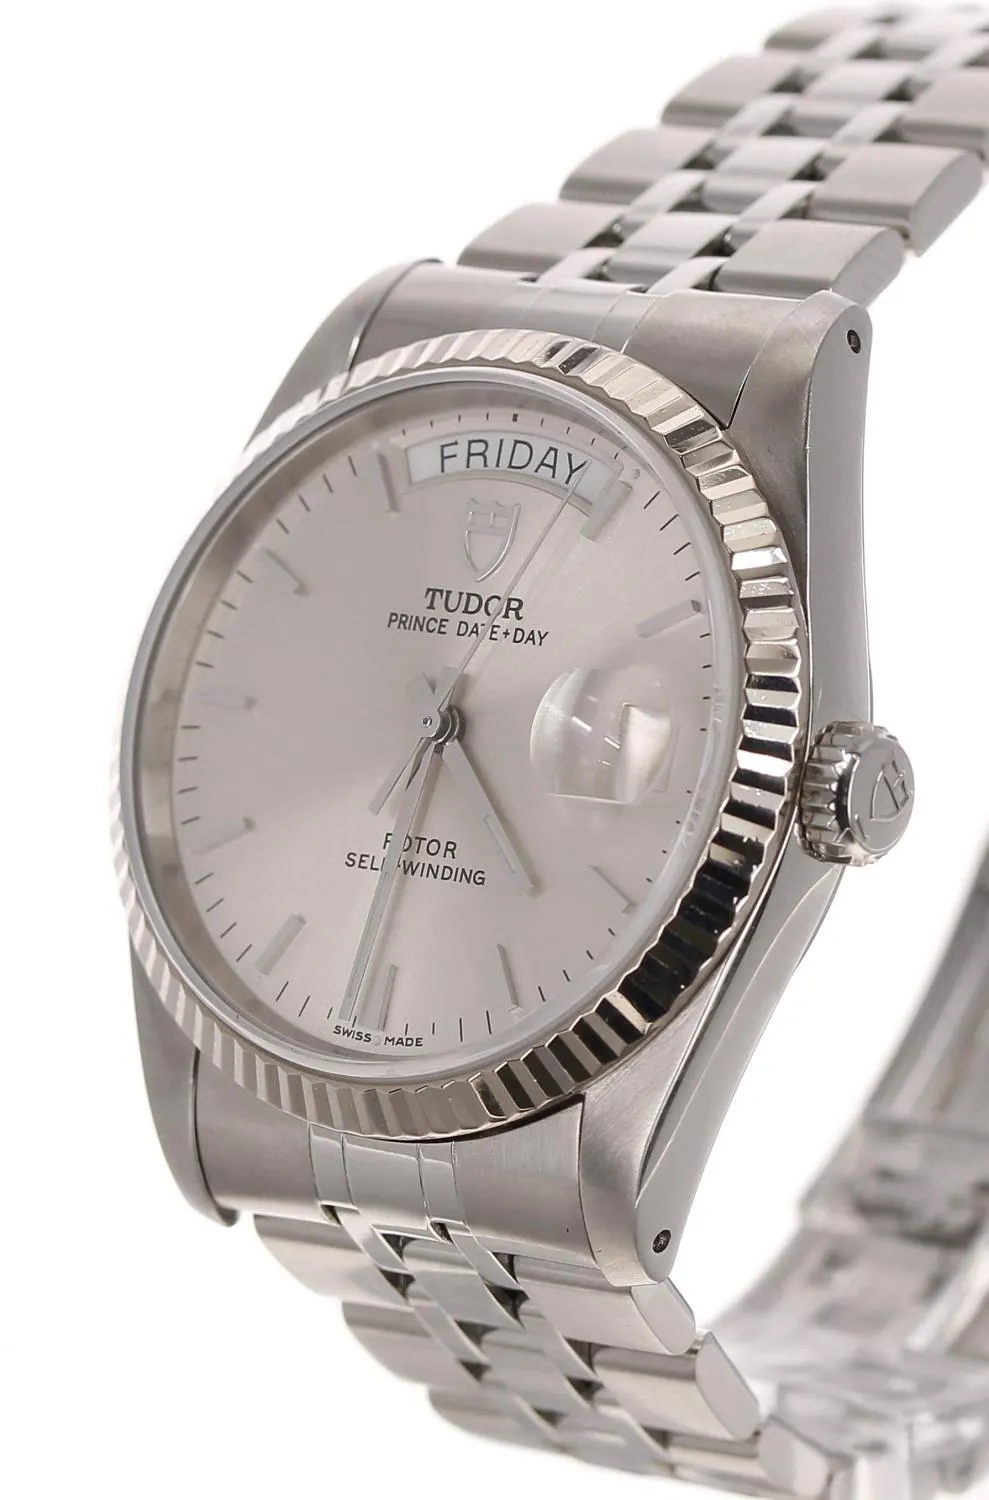 Tudor Prince Date-Day 76214 36mm Stainless steel Silver 2